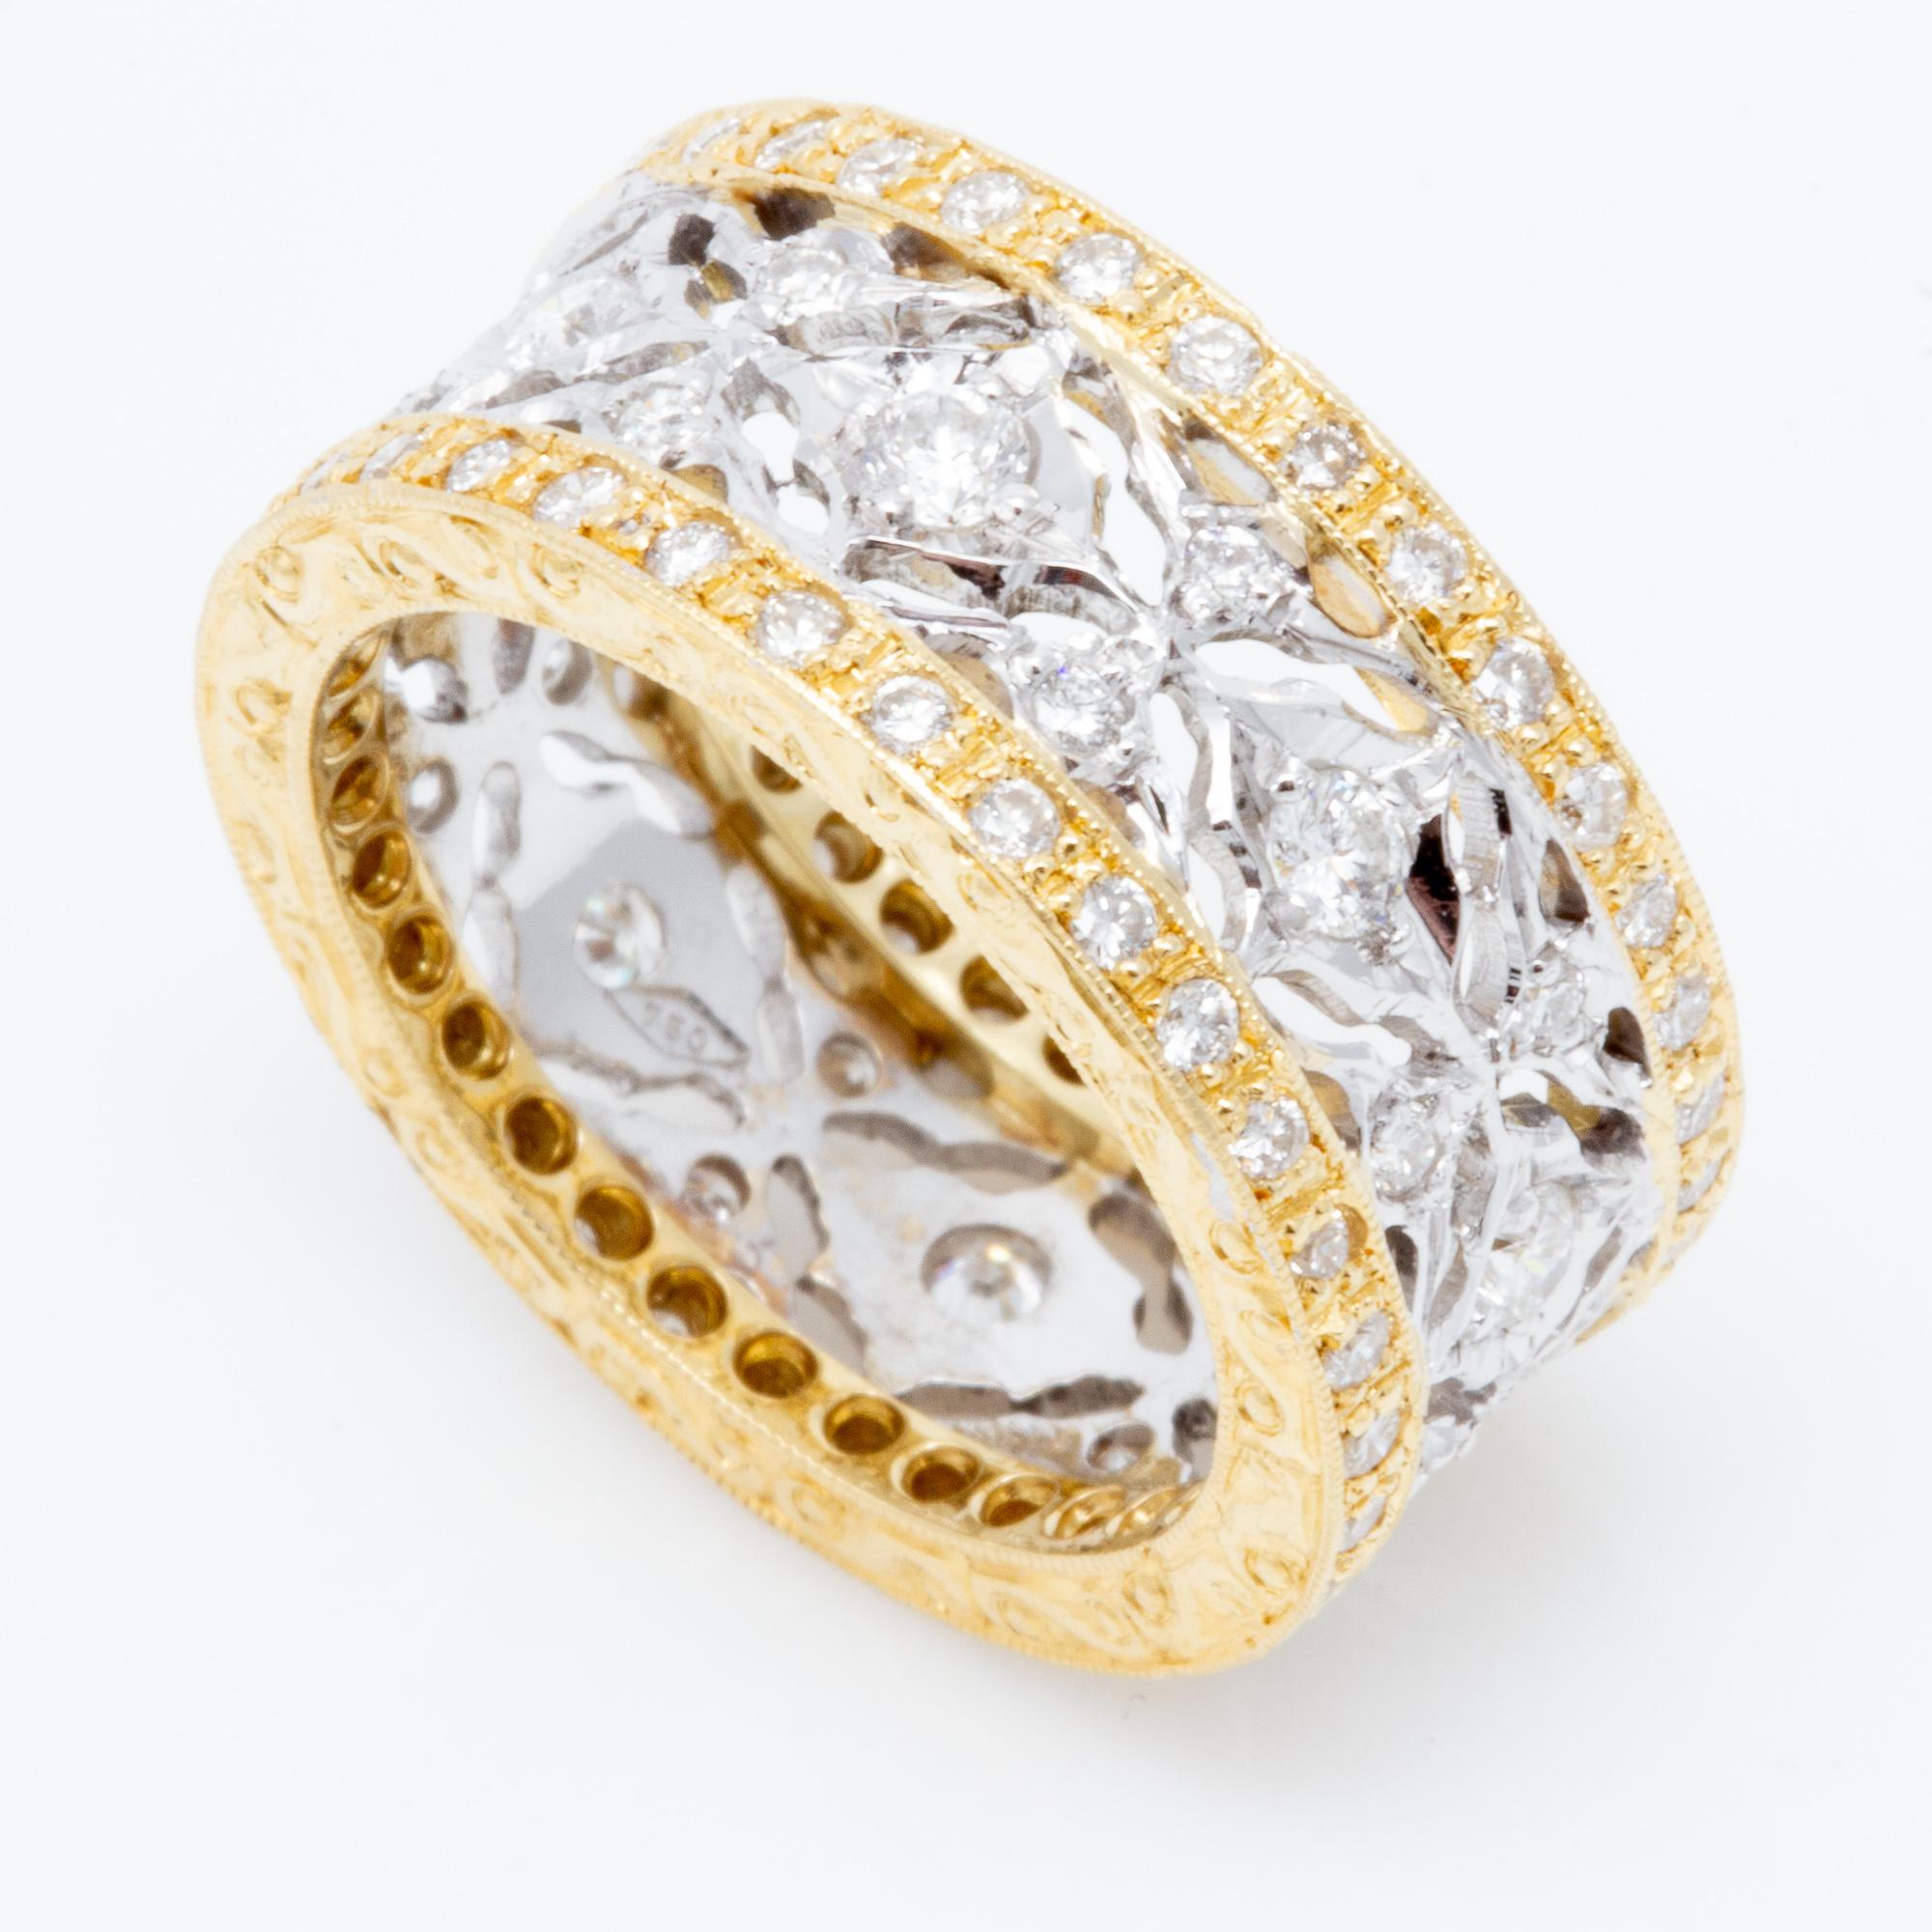 This handmade Italian 1.22 carat diamond and 18k two-tone ring is a gorgeous statement piece as well as a wonderful choice for a non-traditional anniversary band. Well-cut diamonds are set on both edges, surrounding a white gold center.

Created by